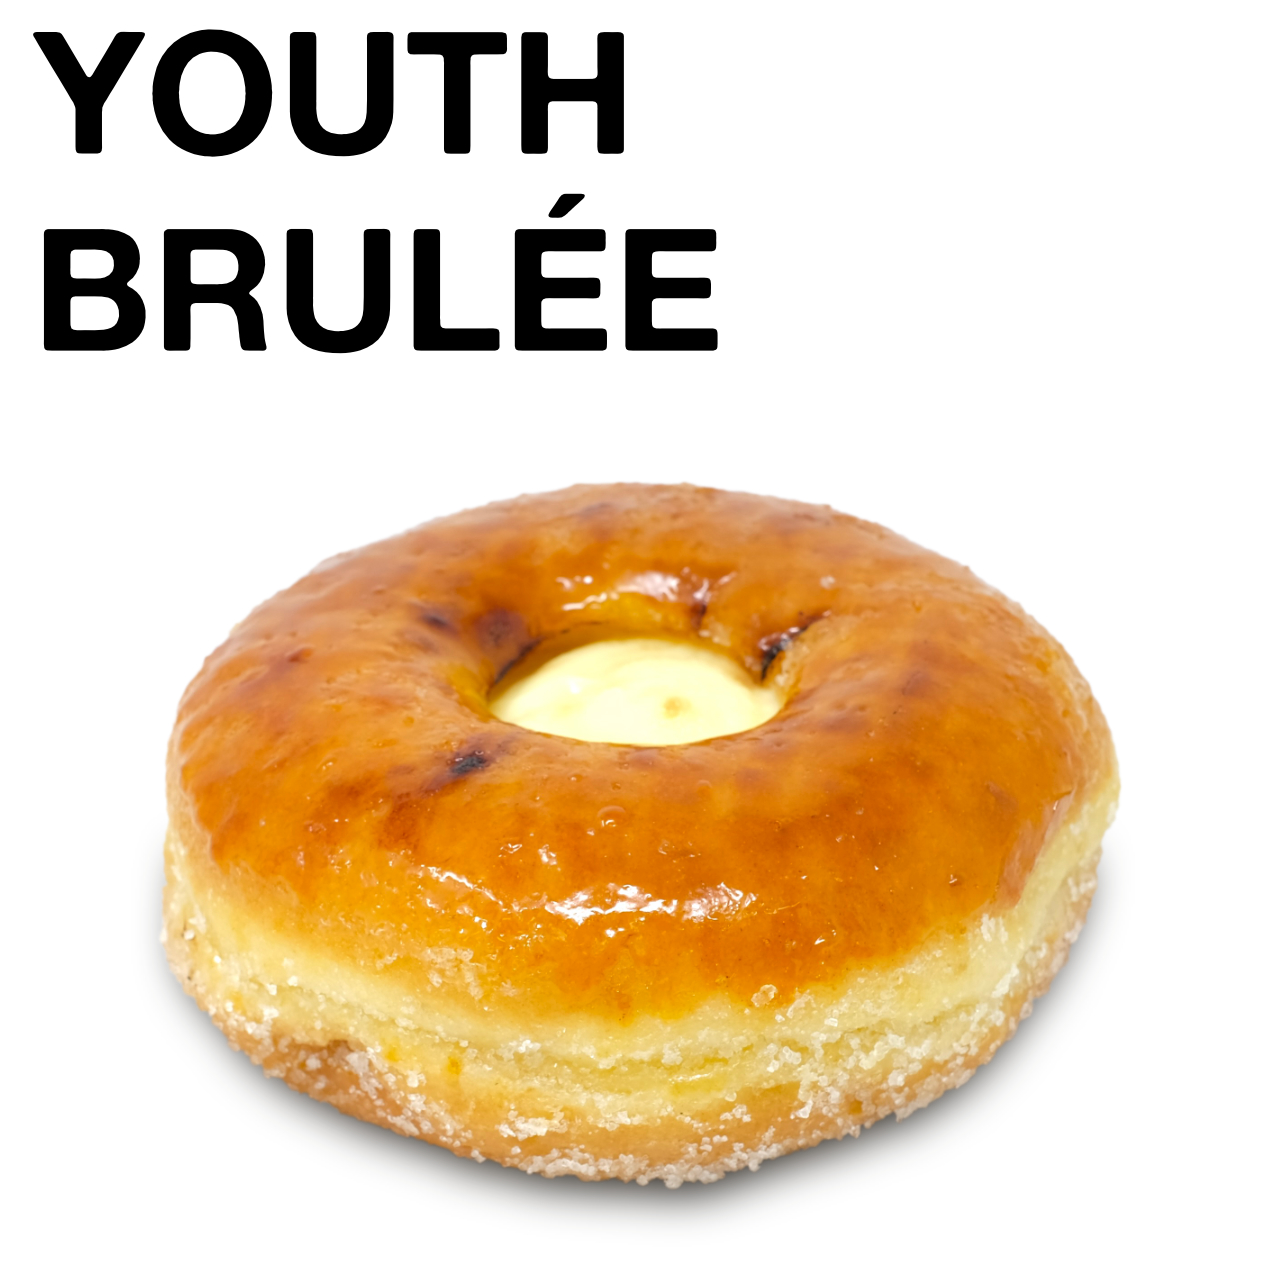 Youth Brulee